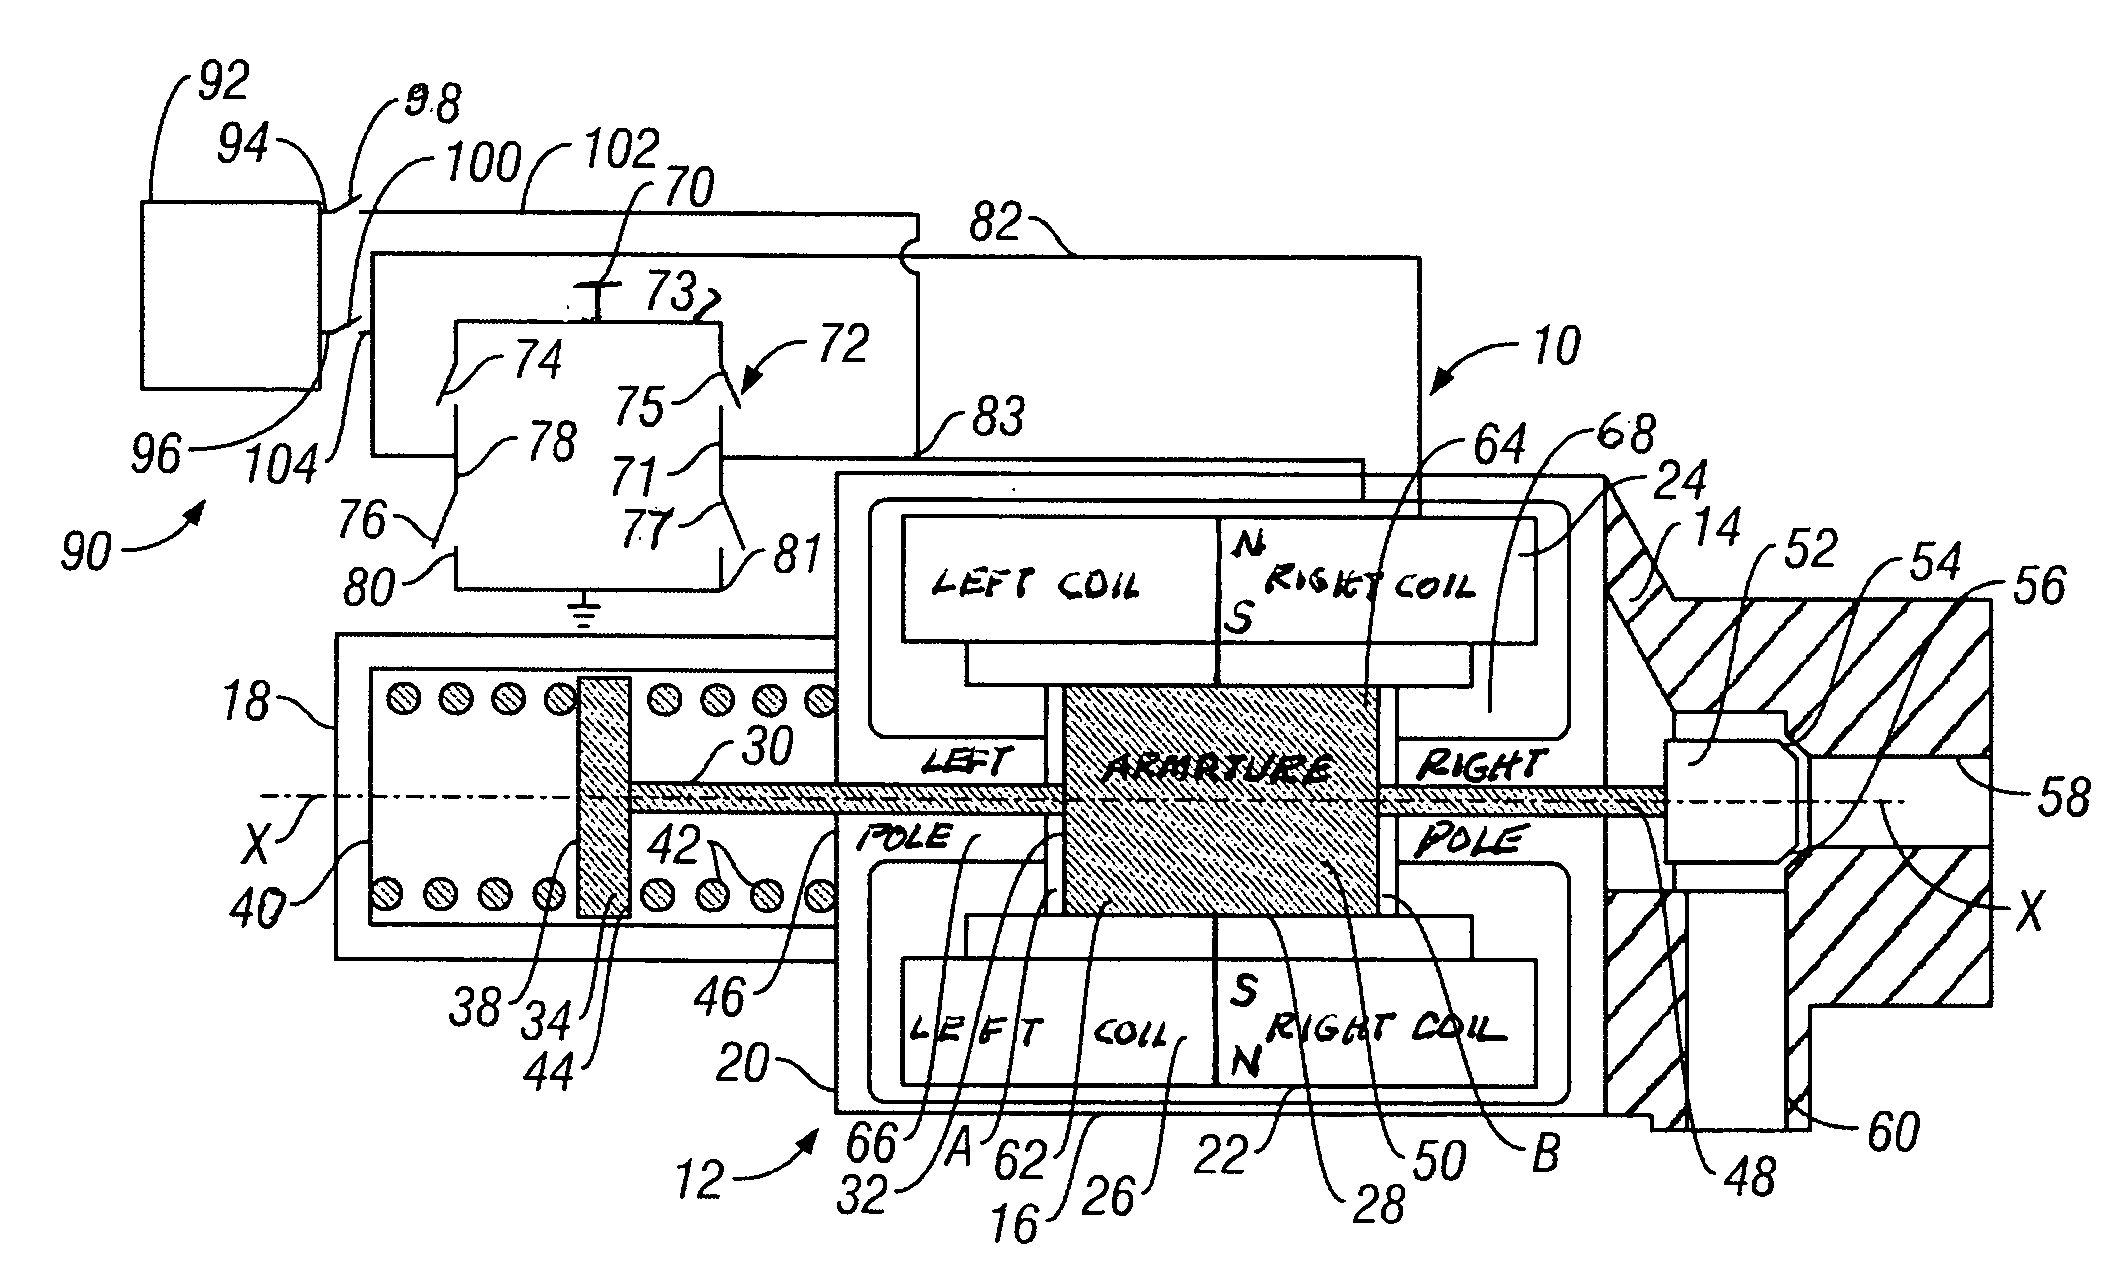 Multi-force actuator valve with multiple operating modes